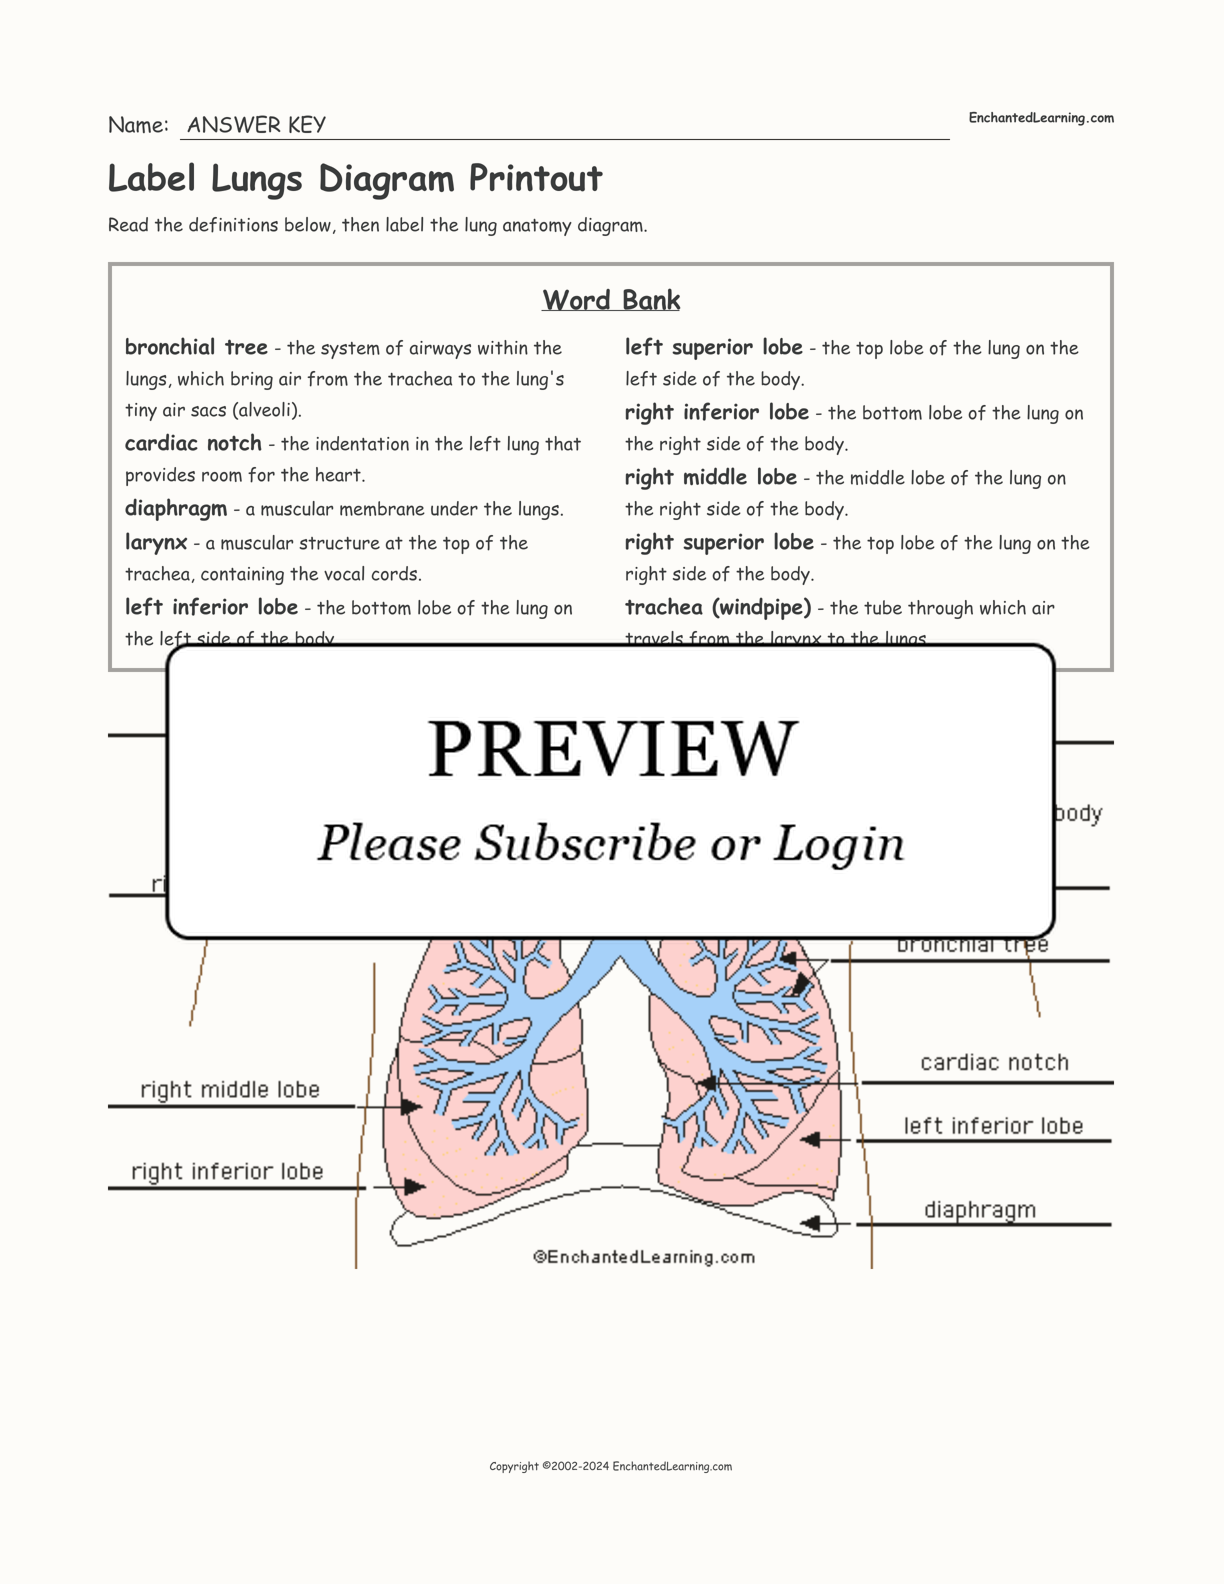 lungs drawing labeled